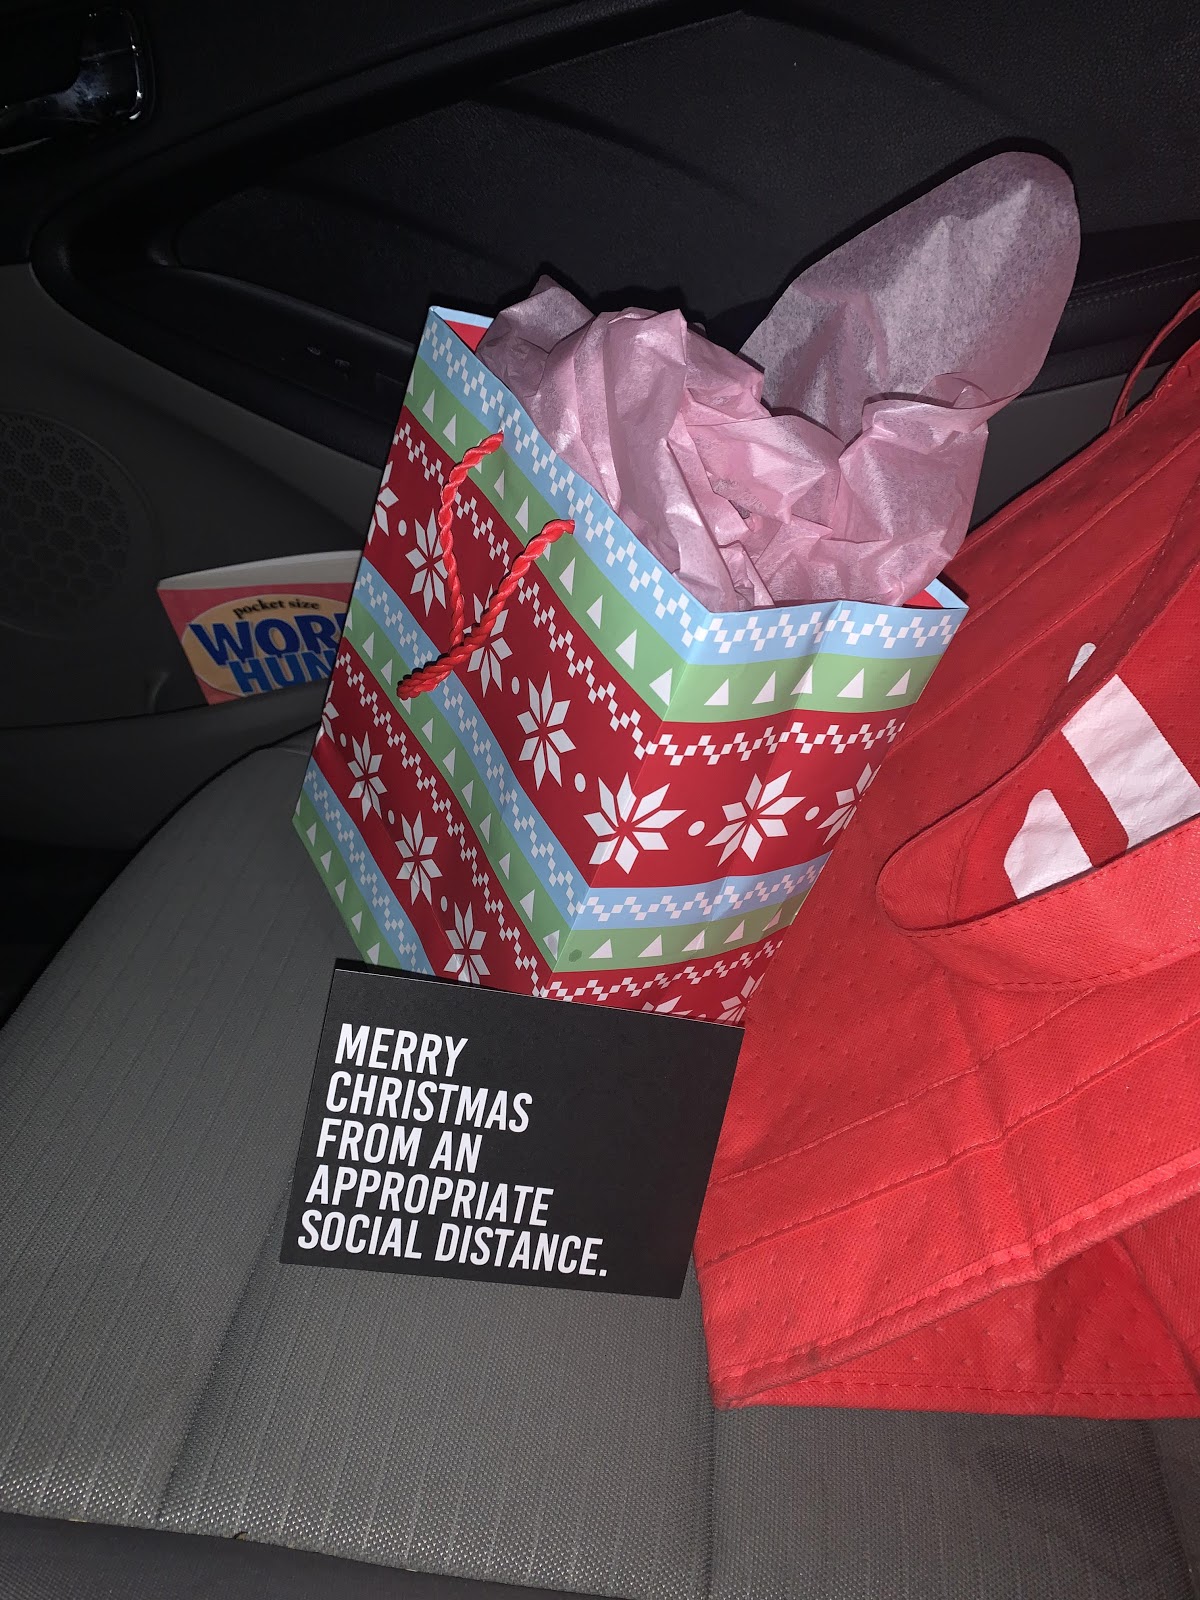 Customers share Christmas spirit with thank you gifts for delivery drivers